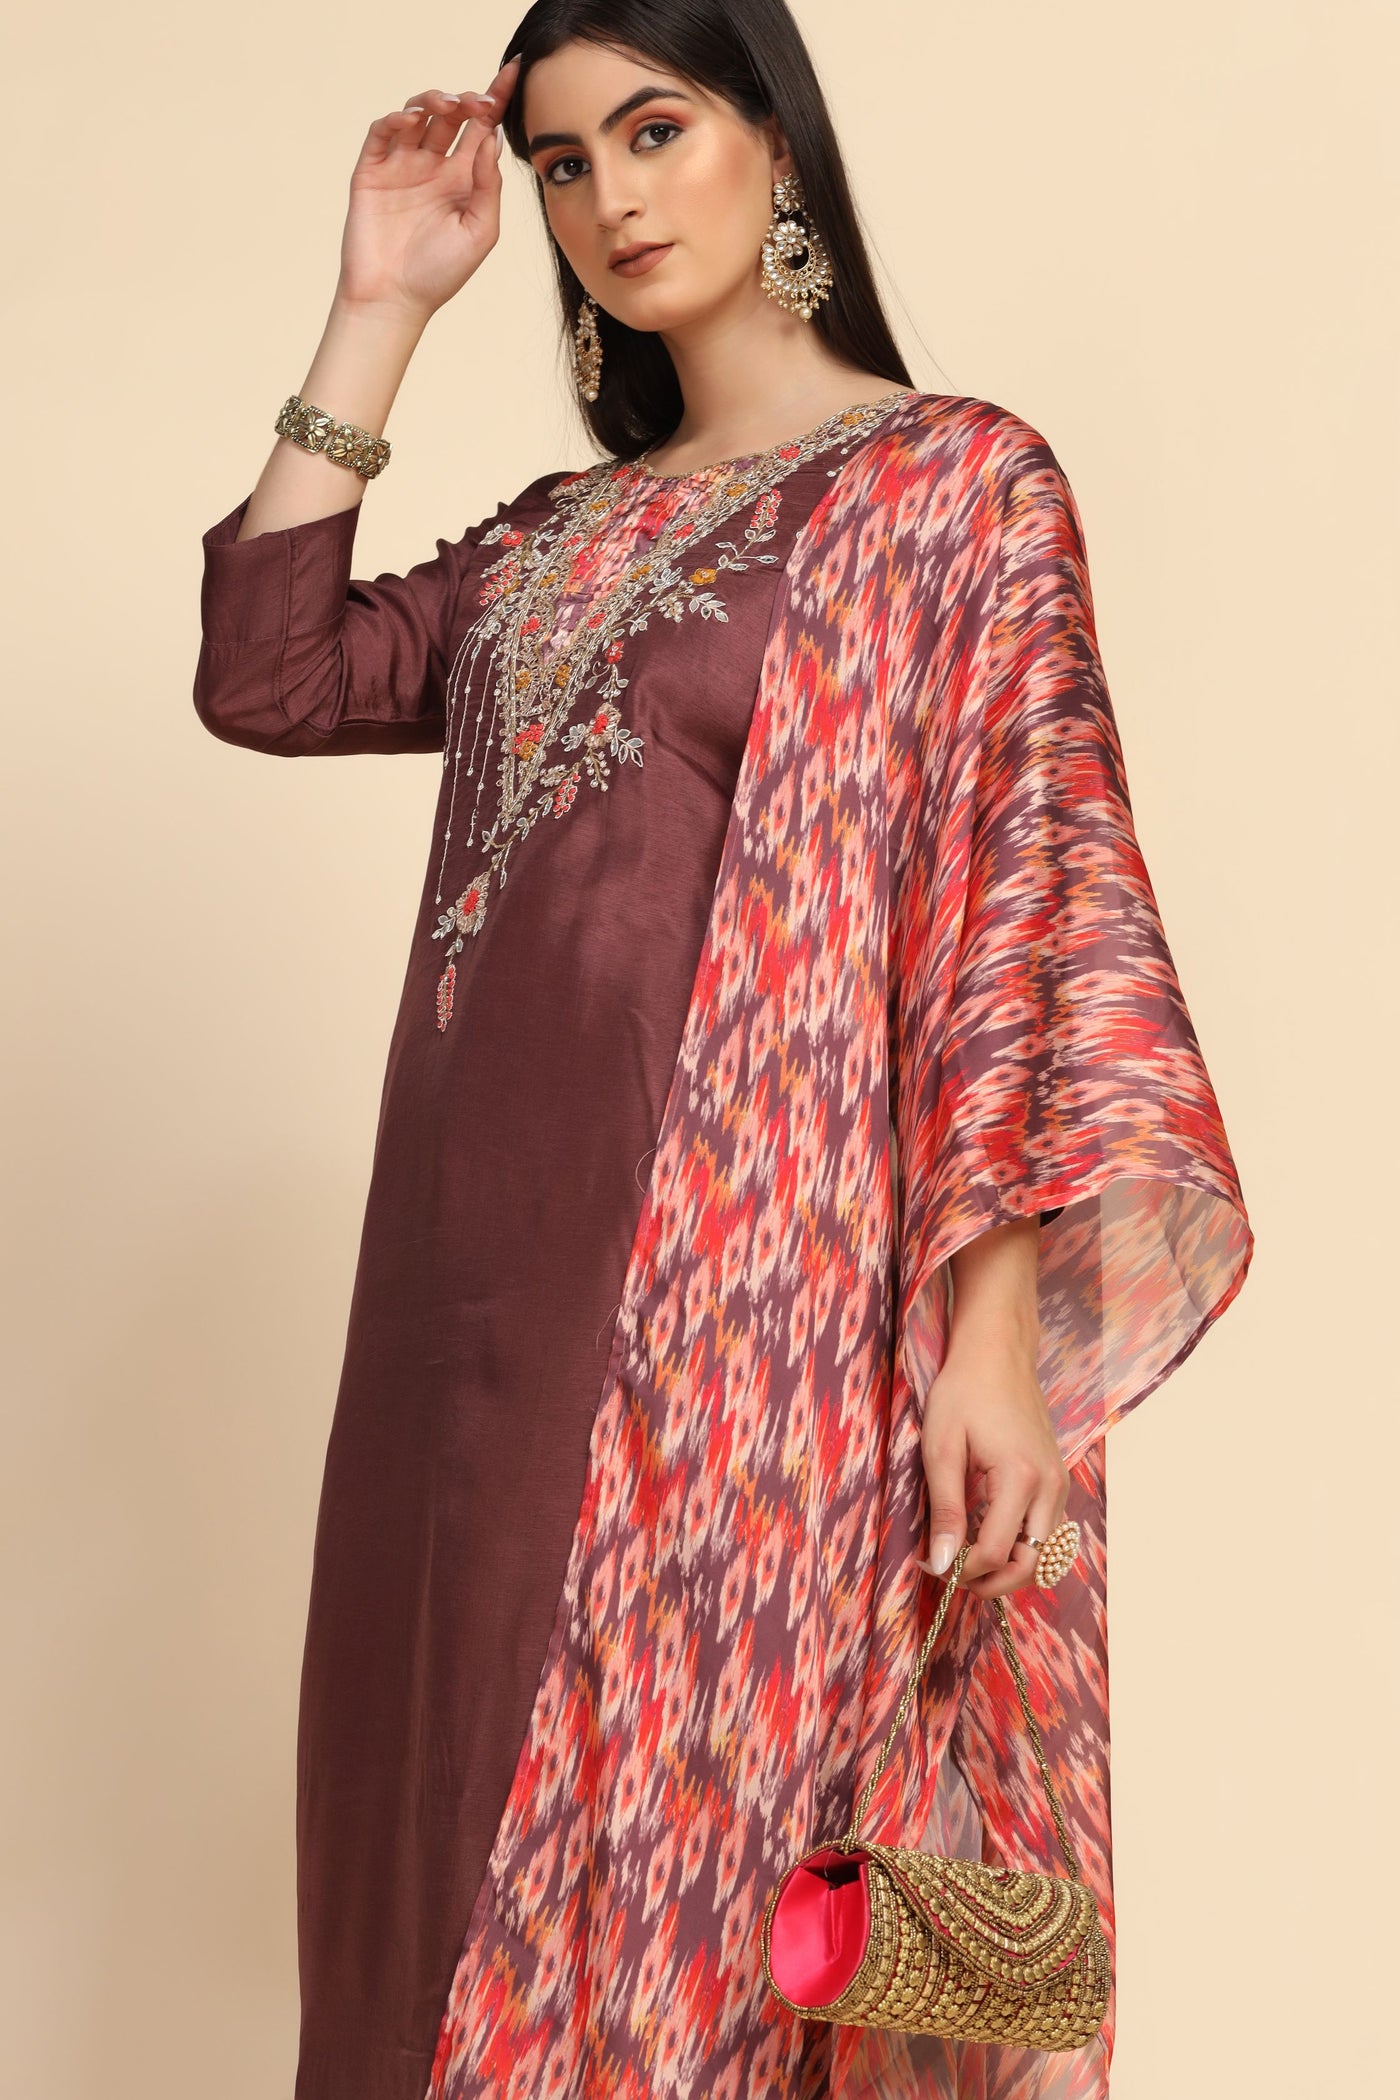 girl wearing Cinnamon Color Floral Motif Embroidered Suit